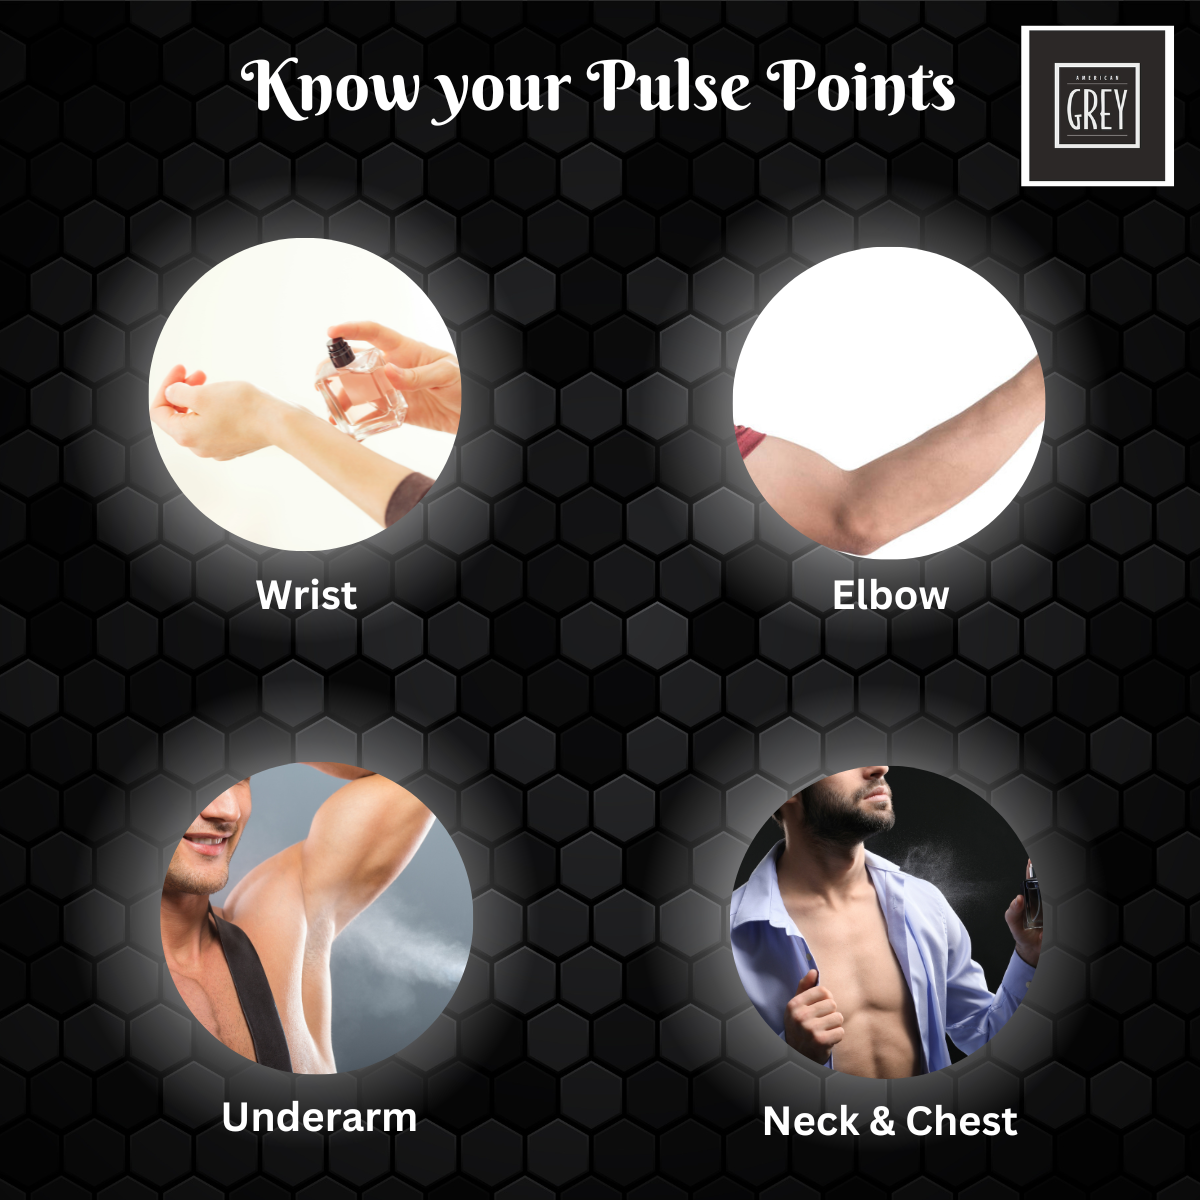 know your pulse points, pulse points, american grey signature pride deo, deo spray for men, , deo spray for him, what are the pulse points to apply deodorant for men, men deodorant, deodorant spray for men, what are the pulse points for perfume male?, what is the best way to apply perfume for men?, where are male pulse points, deodorant tips for men, deodorant tips for male in india, perfume pulse points myths, best pulse points for perfume male, top rated mens deo, men grooming essential, men fragrance for summer season, best deo for hot weather, popular summer deodorant for men, best smelling deo for summer season, best evening wear for men